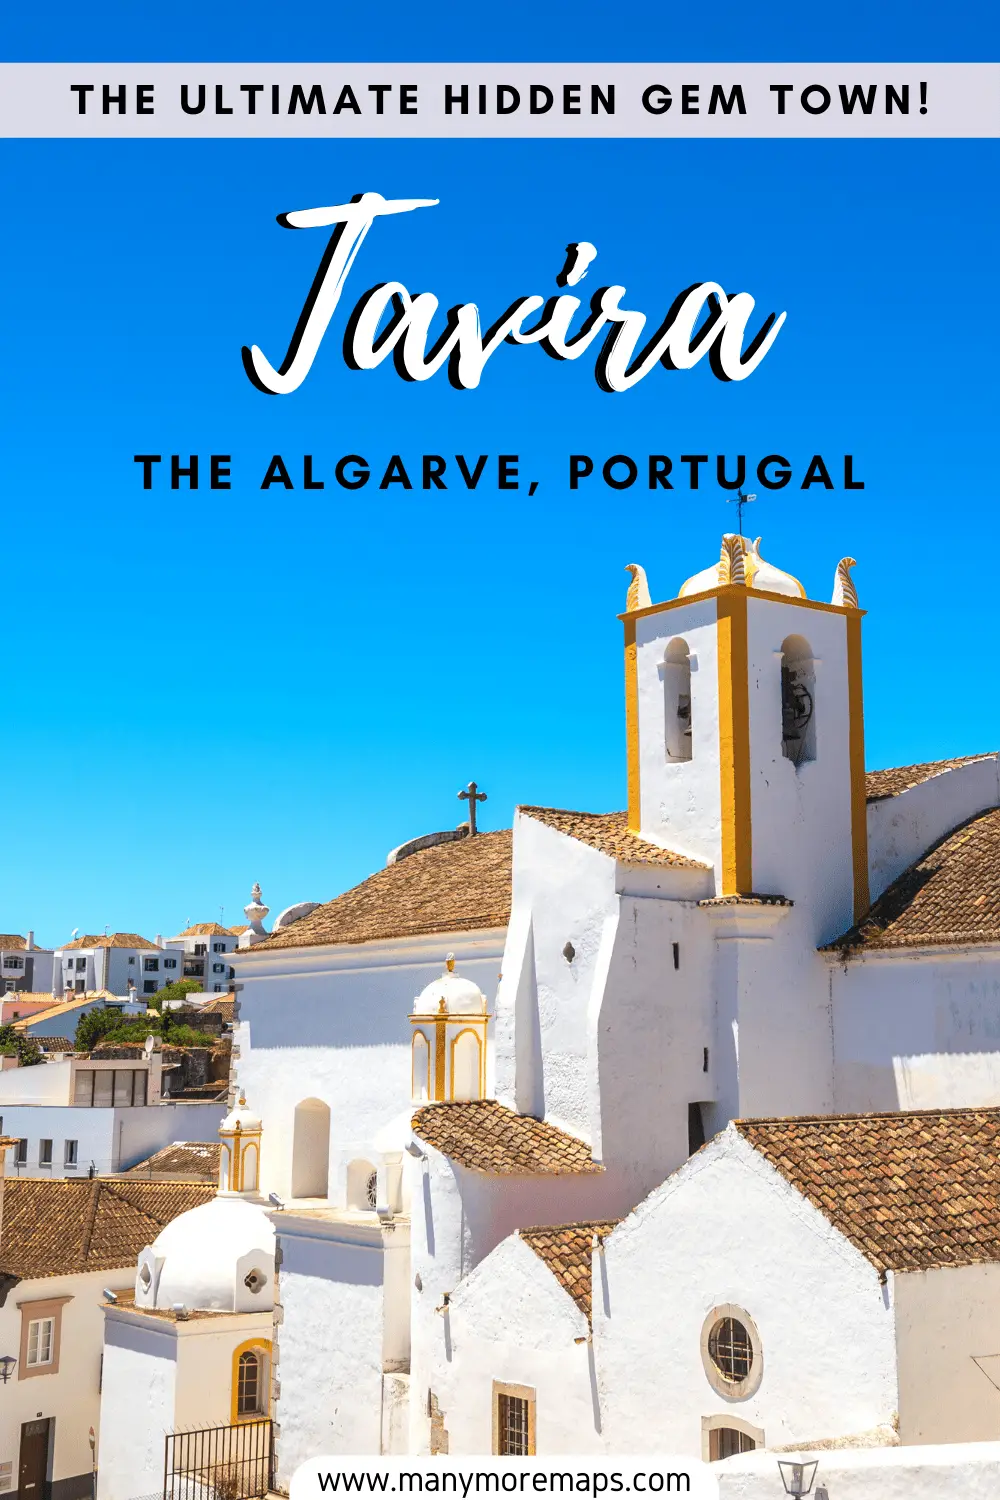 Planning your intinerary for a trip to the Algarve in Portugal and want to find some hidden gems? Look no further than Tavira, one of the best and most beautiful places to visit in Portugal! This complete travel guide includes the best things to do in Tavira, how many days to visit for, and the best hotels.